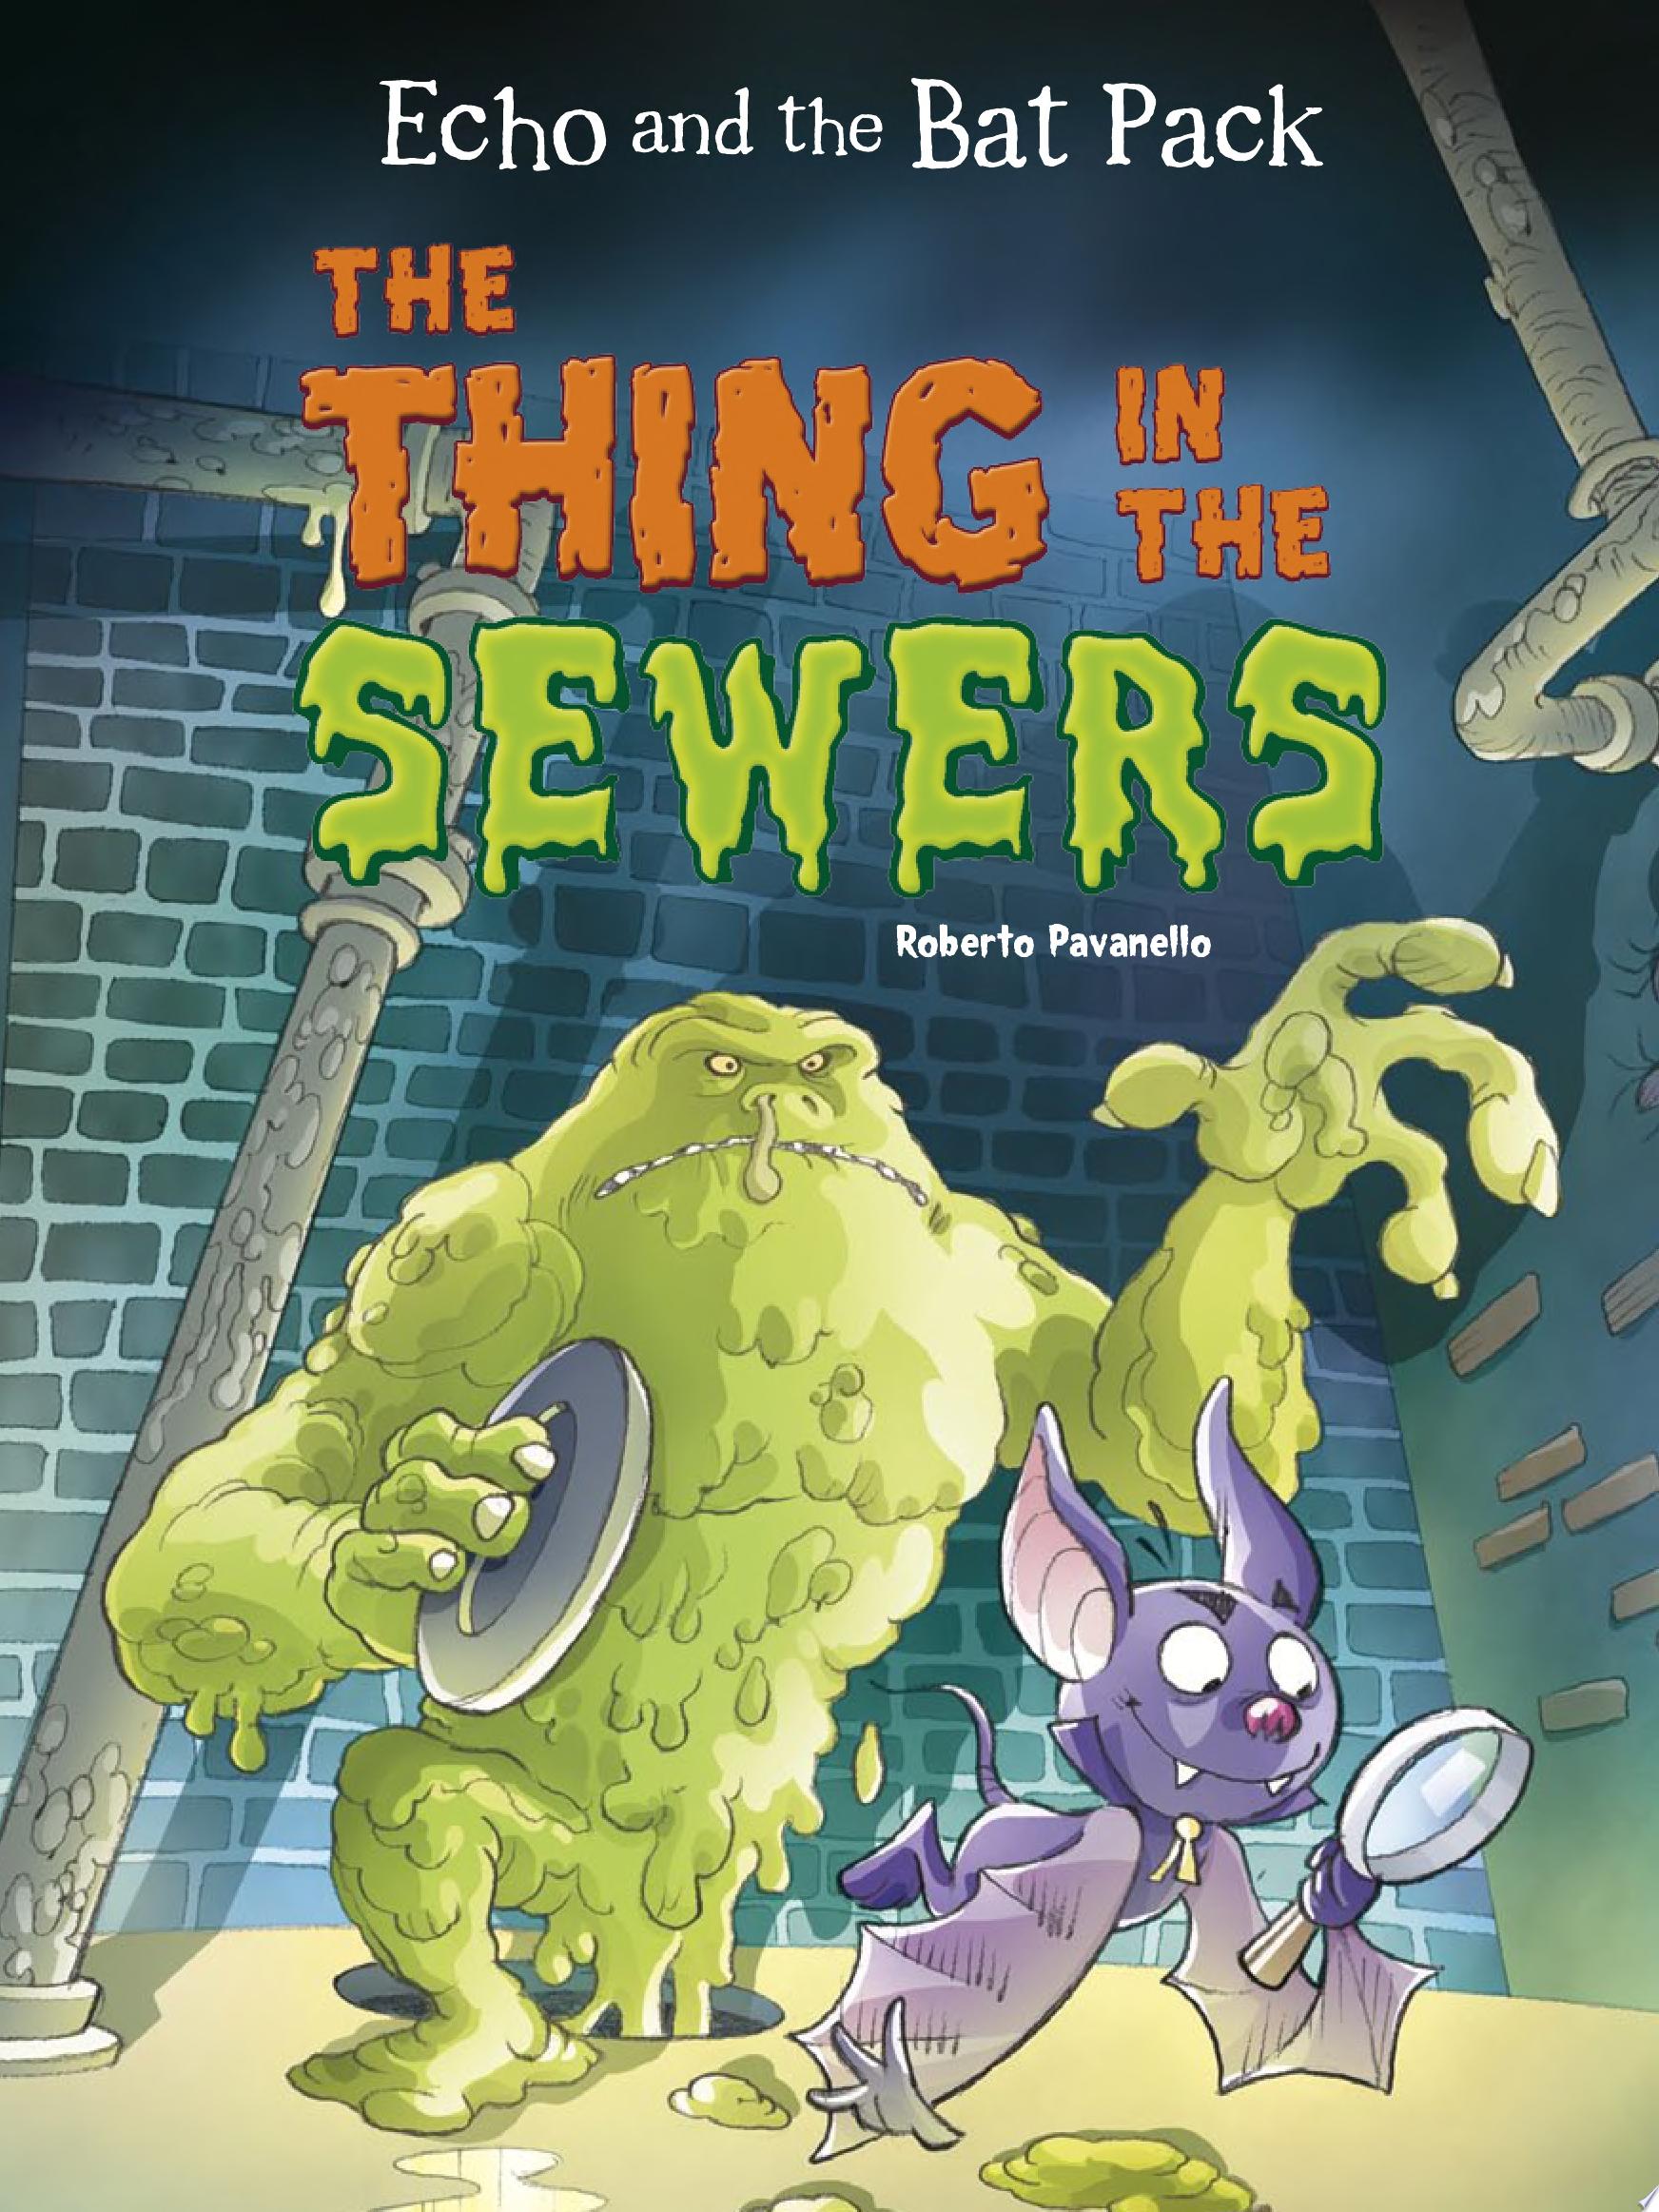 Image for "The Thing in the Sewers"